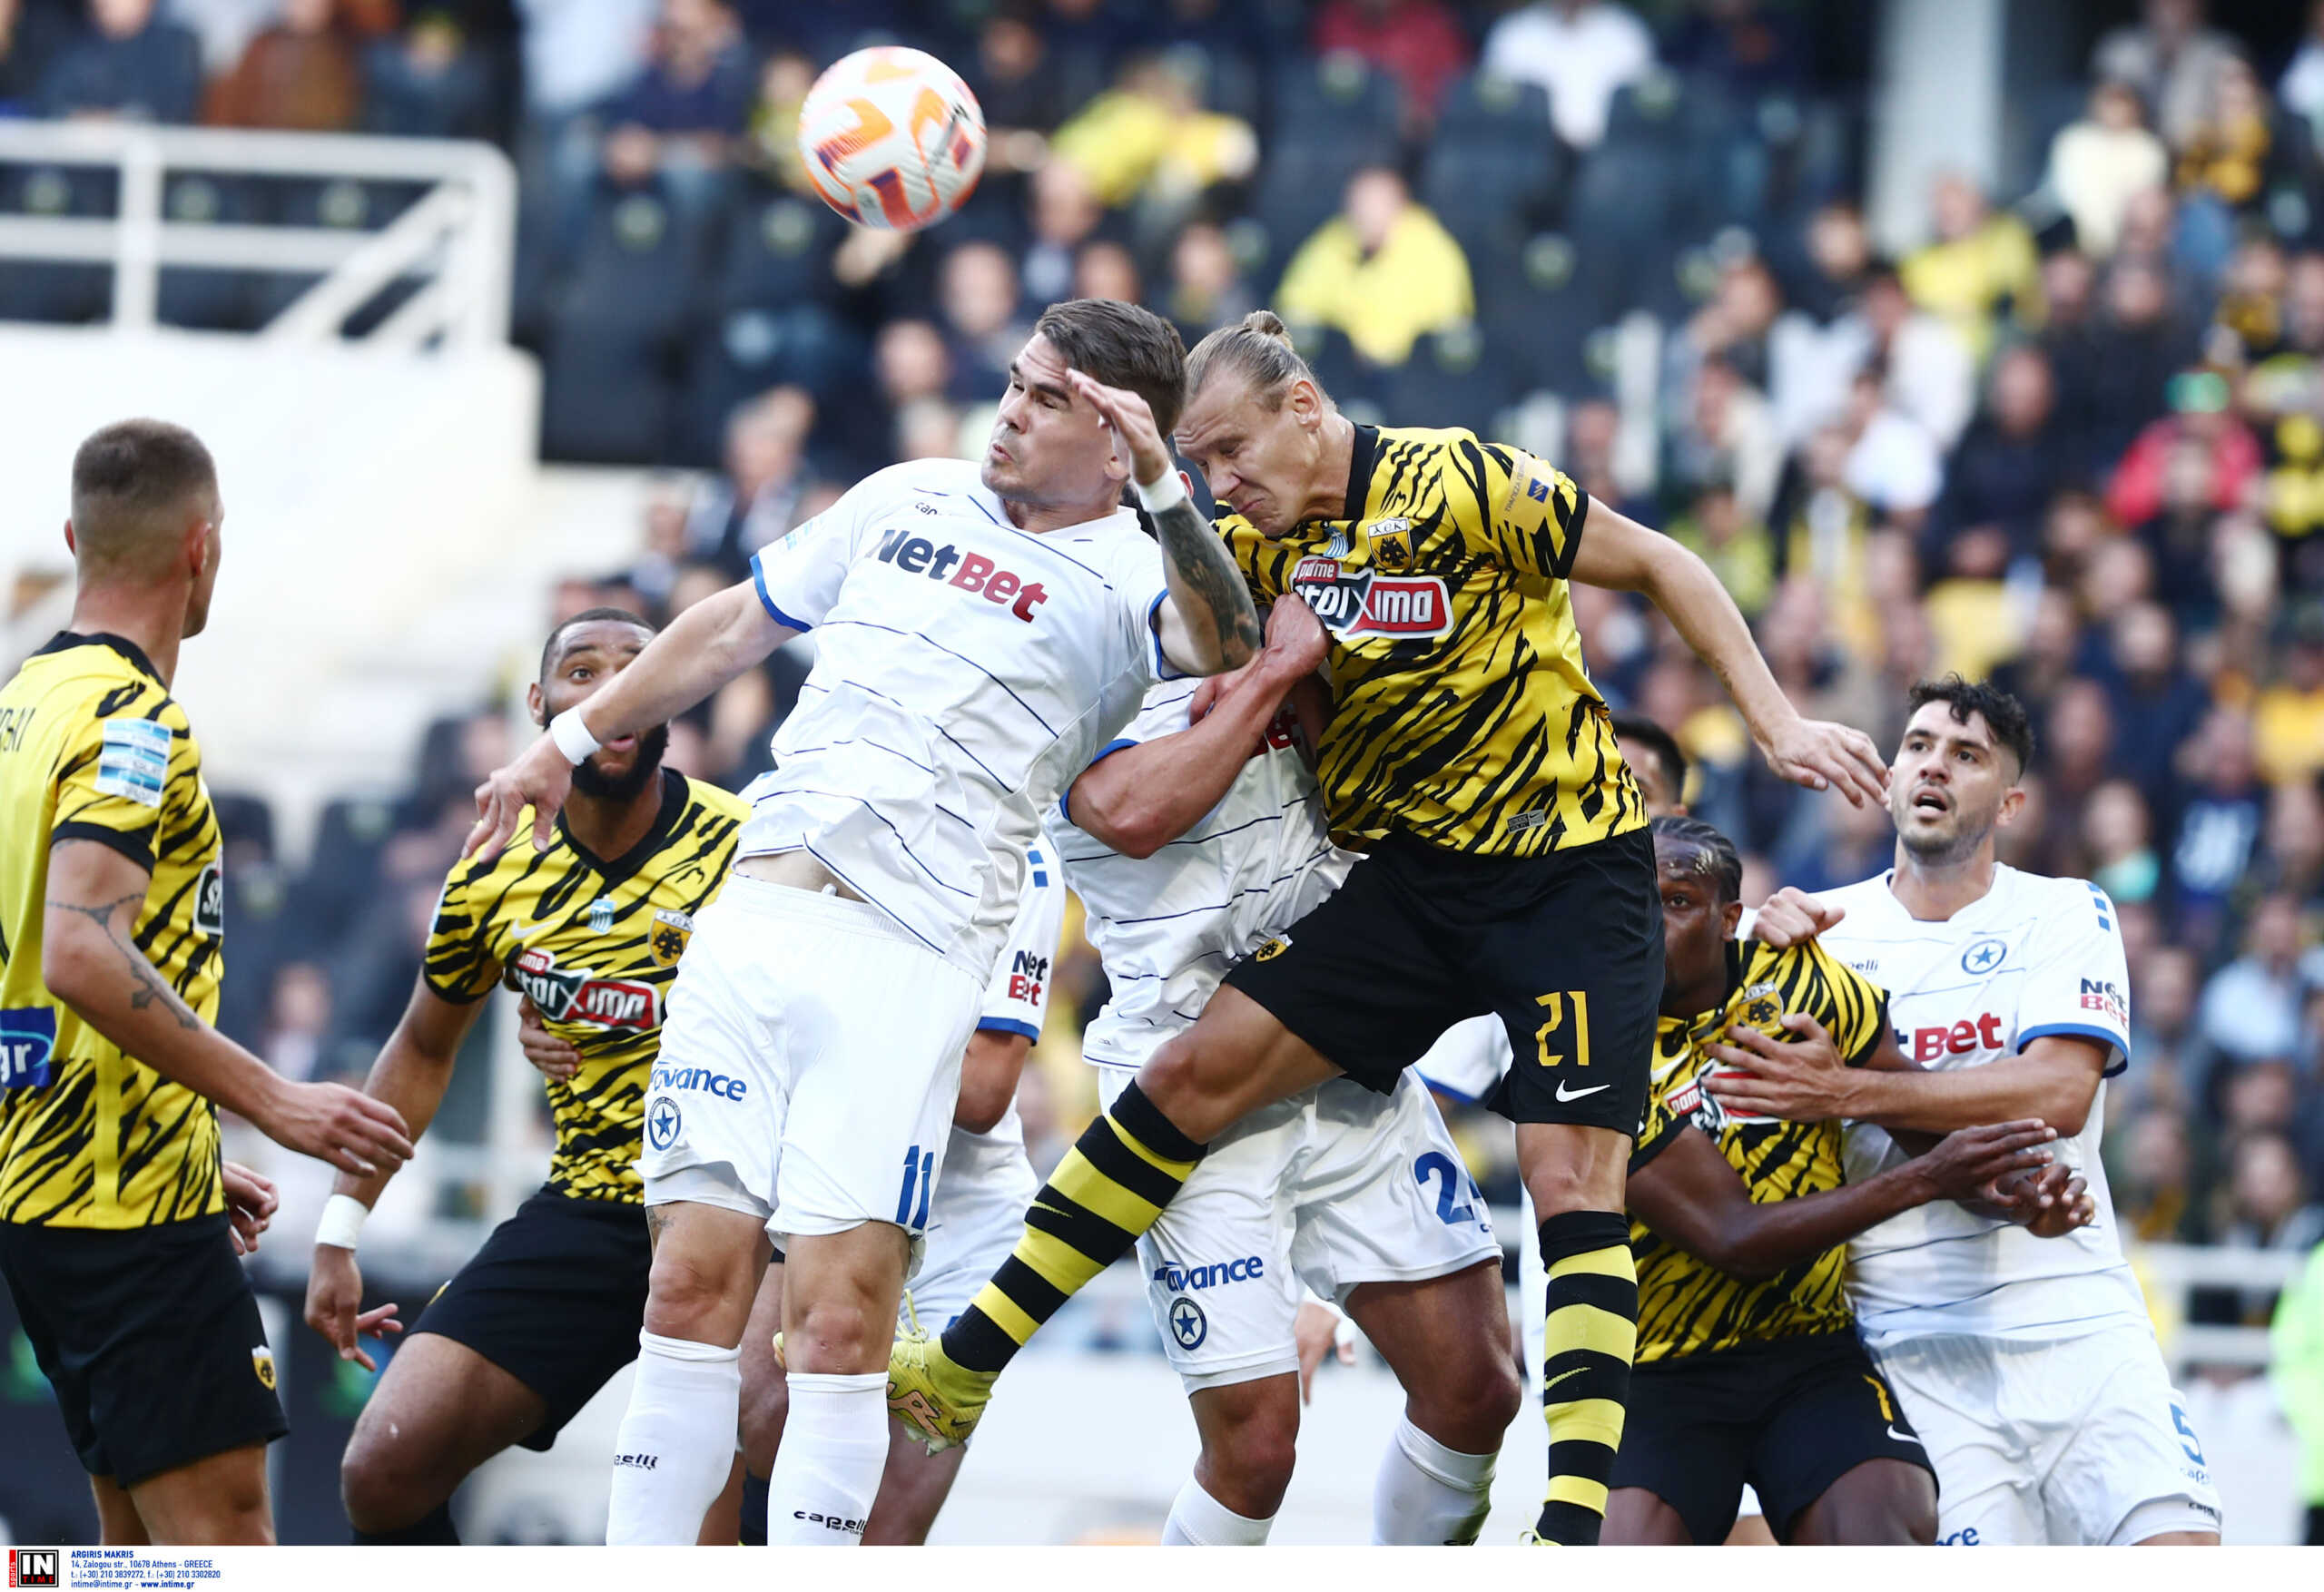 AEK: Crossing in the most talked about game of the season